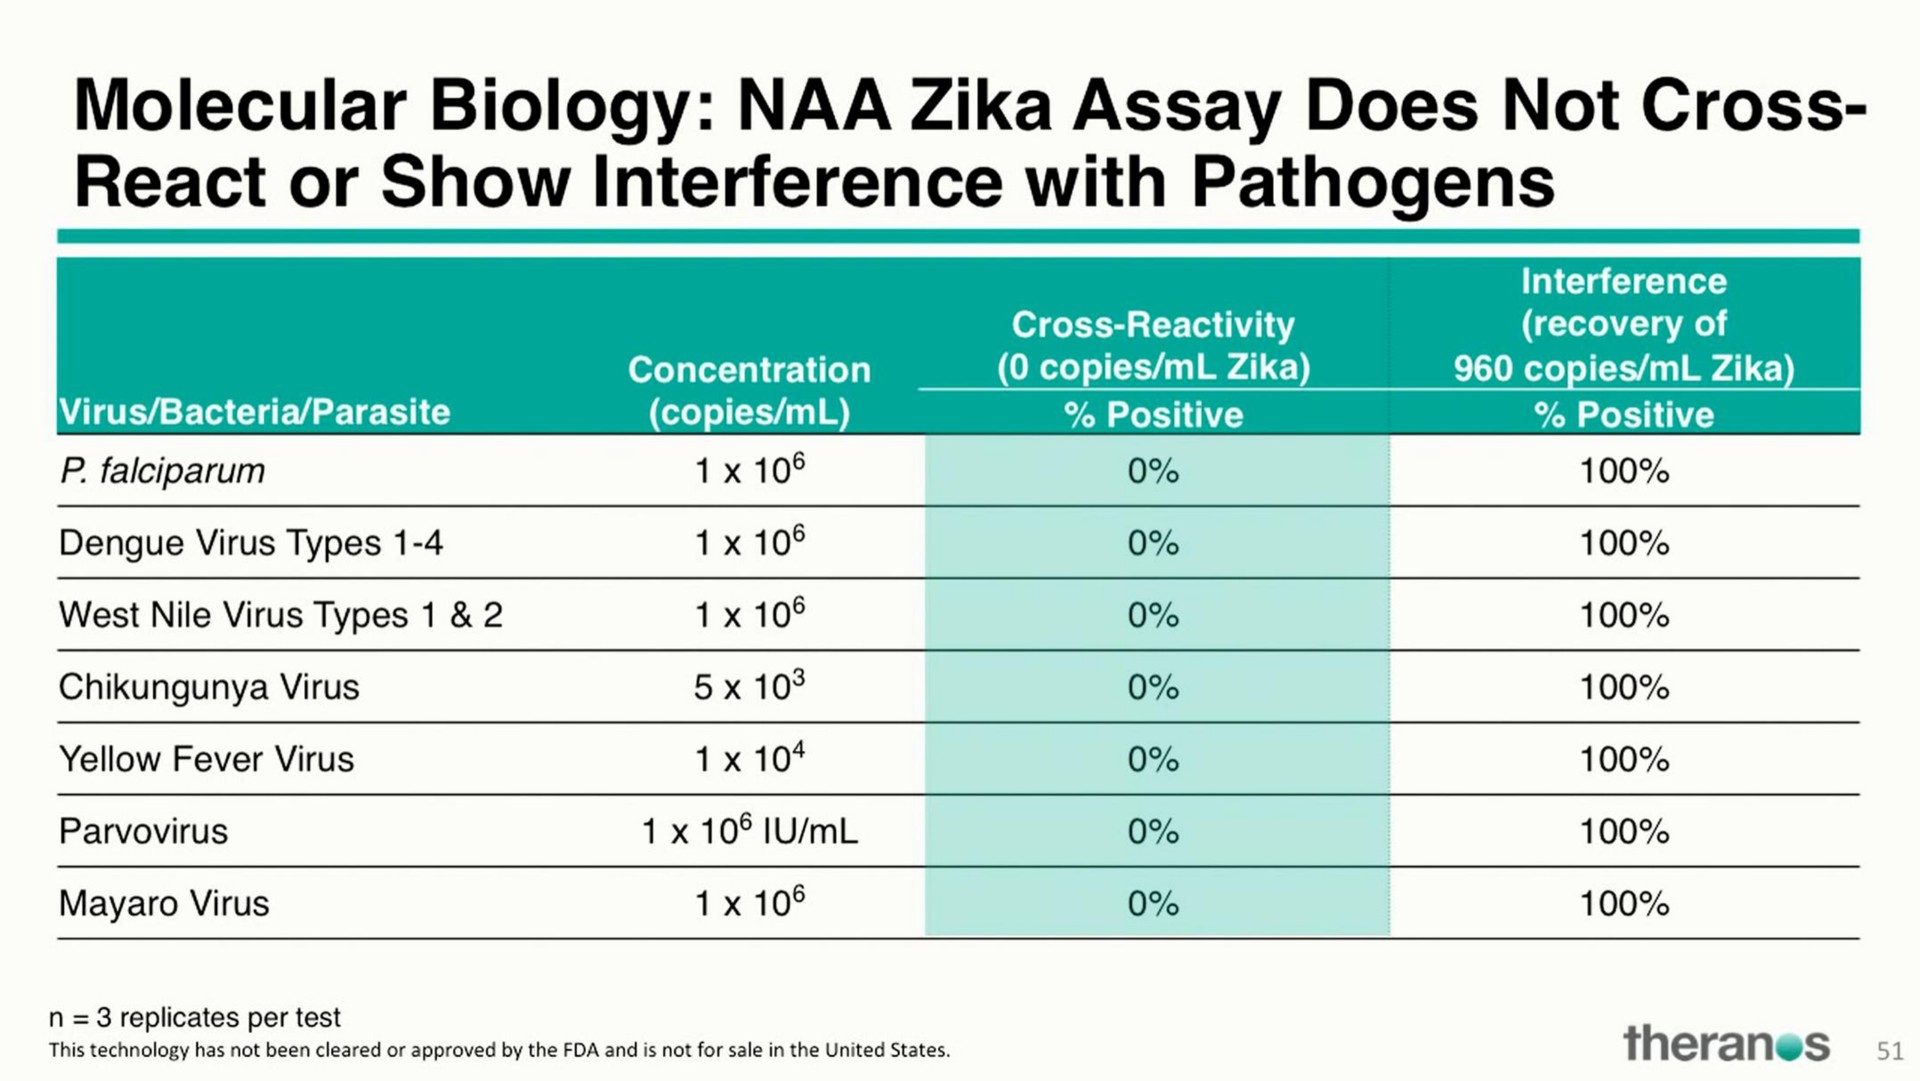 molecular biology naa assay does not cross react or show interference with pathogens | Theranos